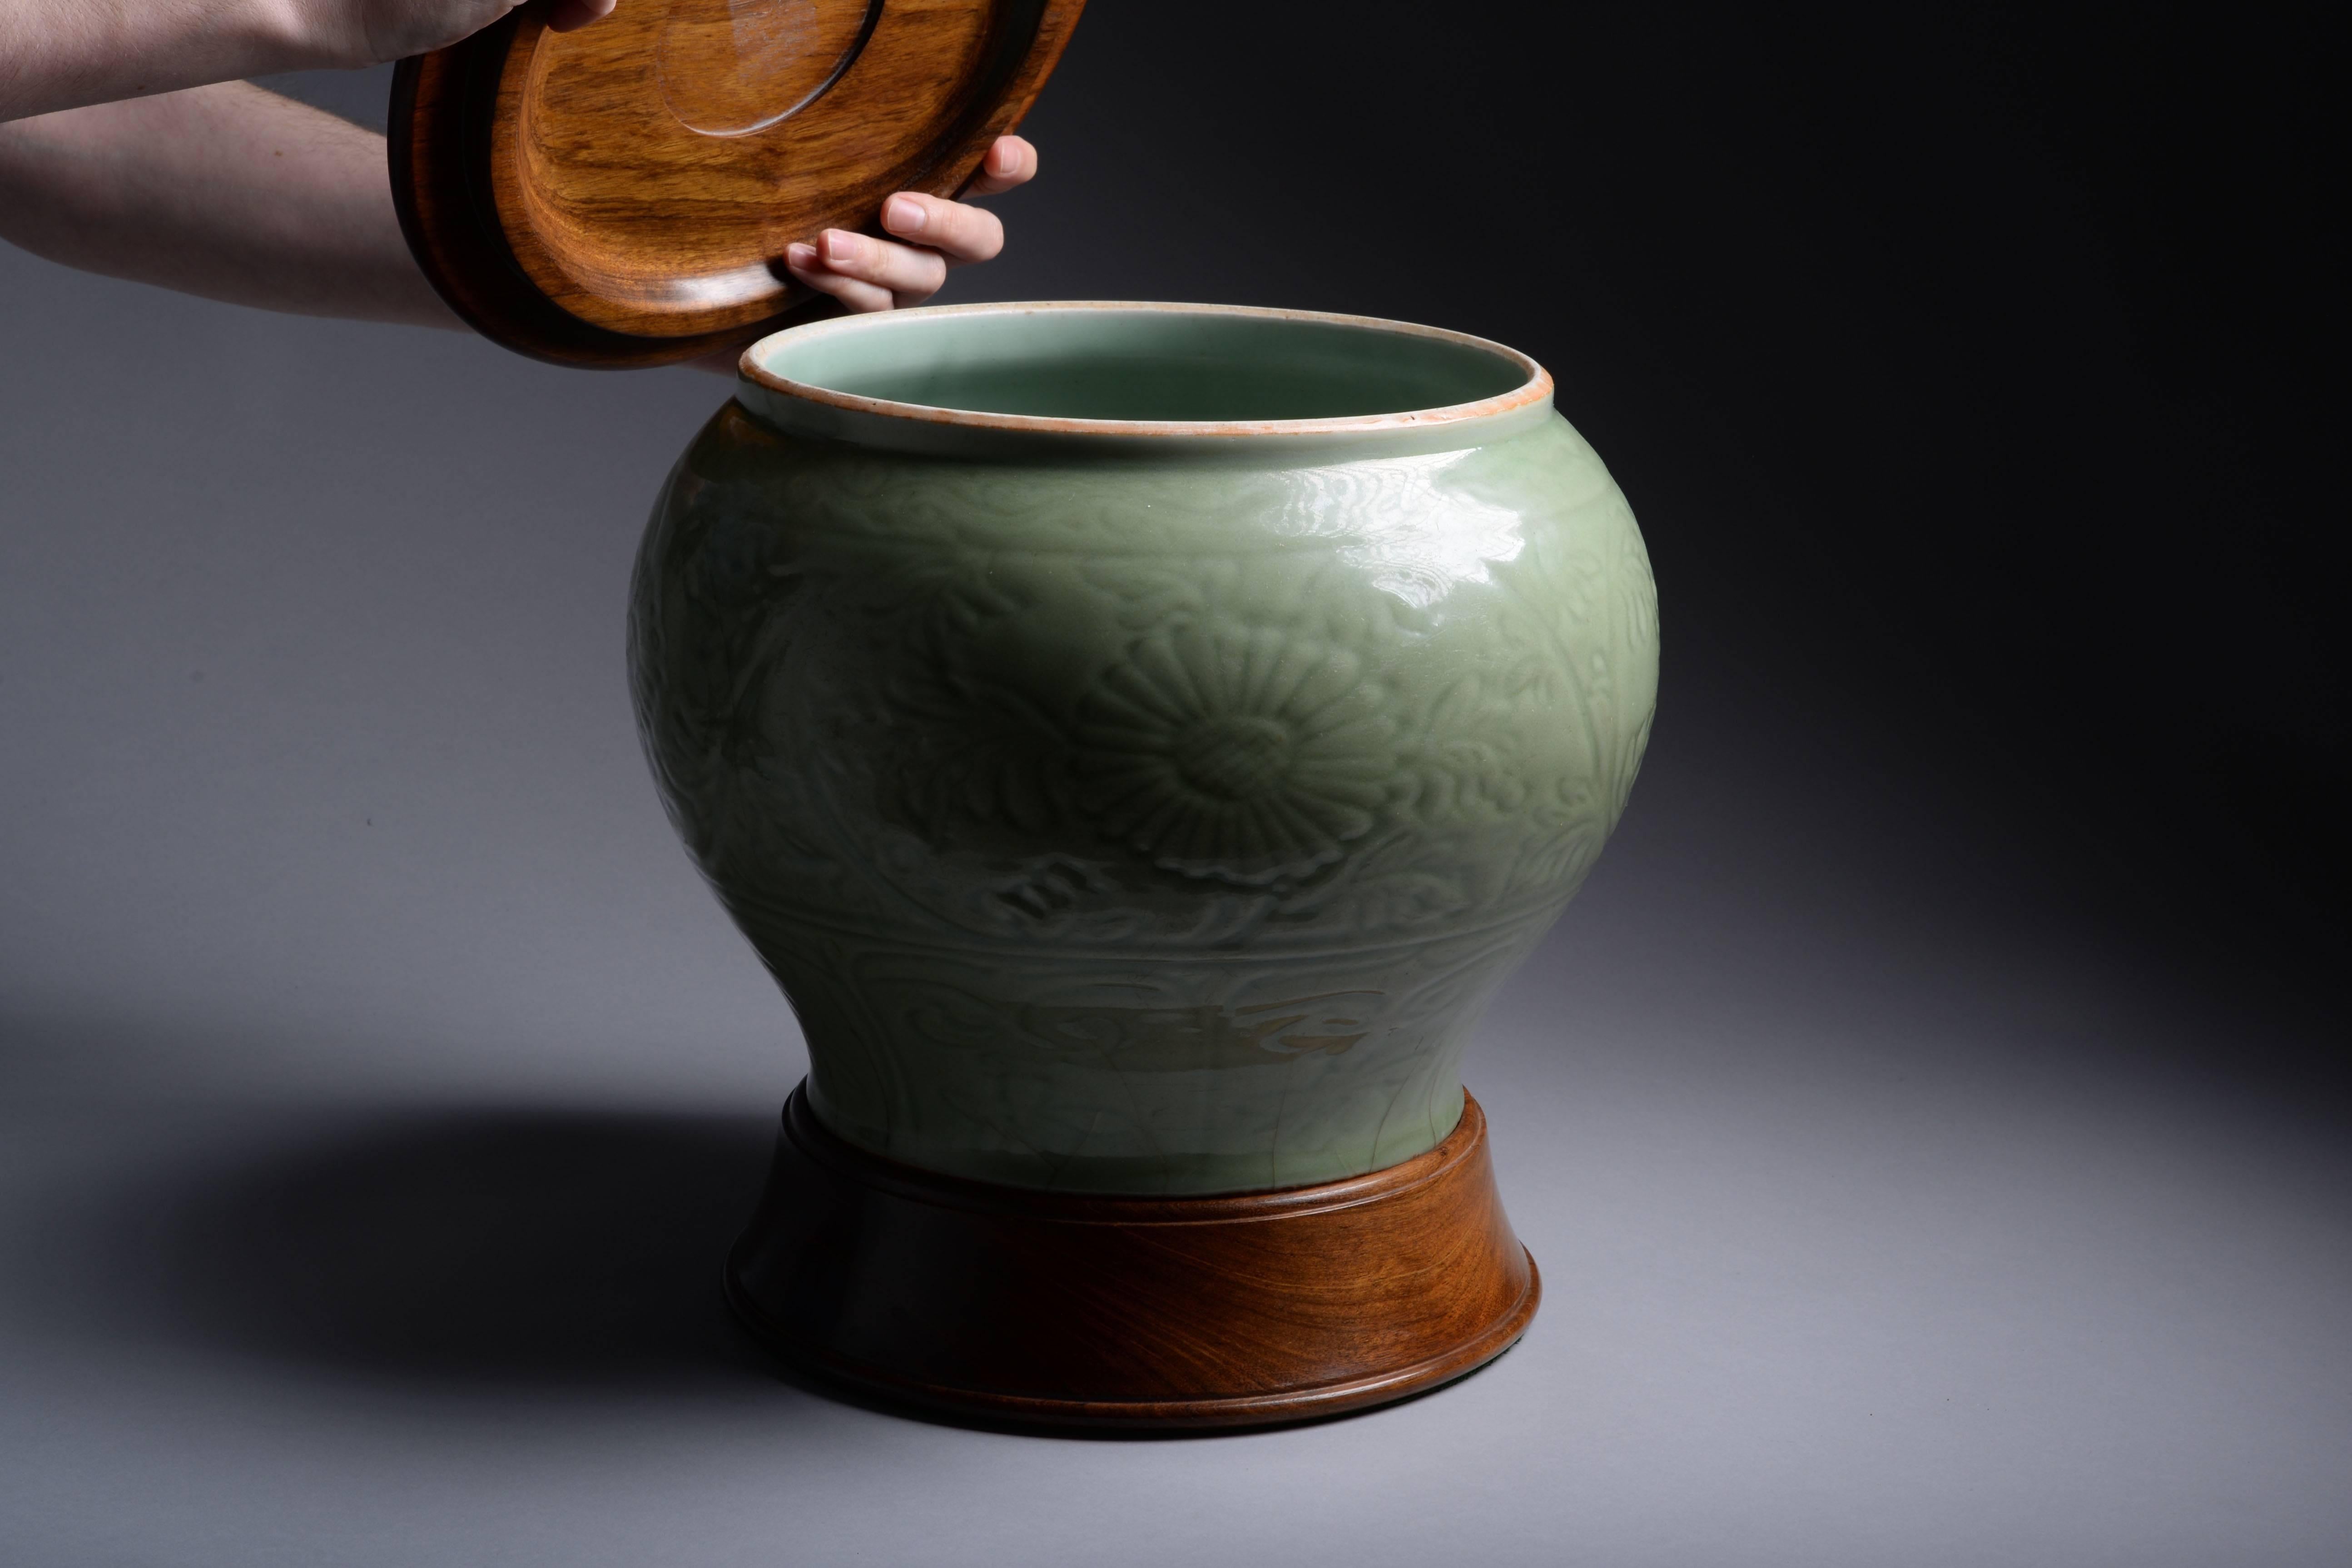 A beautiful Ming dynasty celadon glazed balluster jar, from the Longquan kilns and dating to the 14th-17th century.

The exterior decorated with a band of blossoming chrysanthemum flowers and scrolling foliage, a lappet band encircling the upper